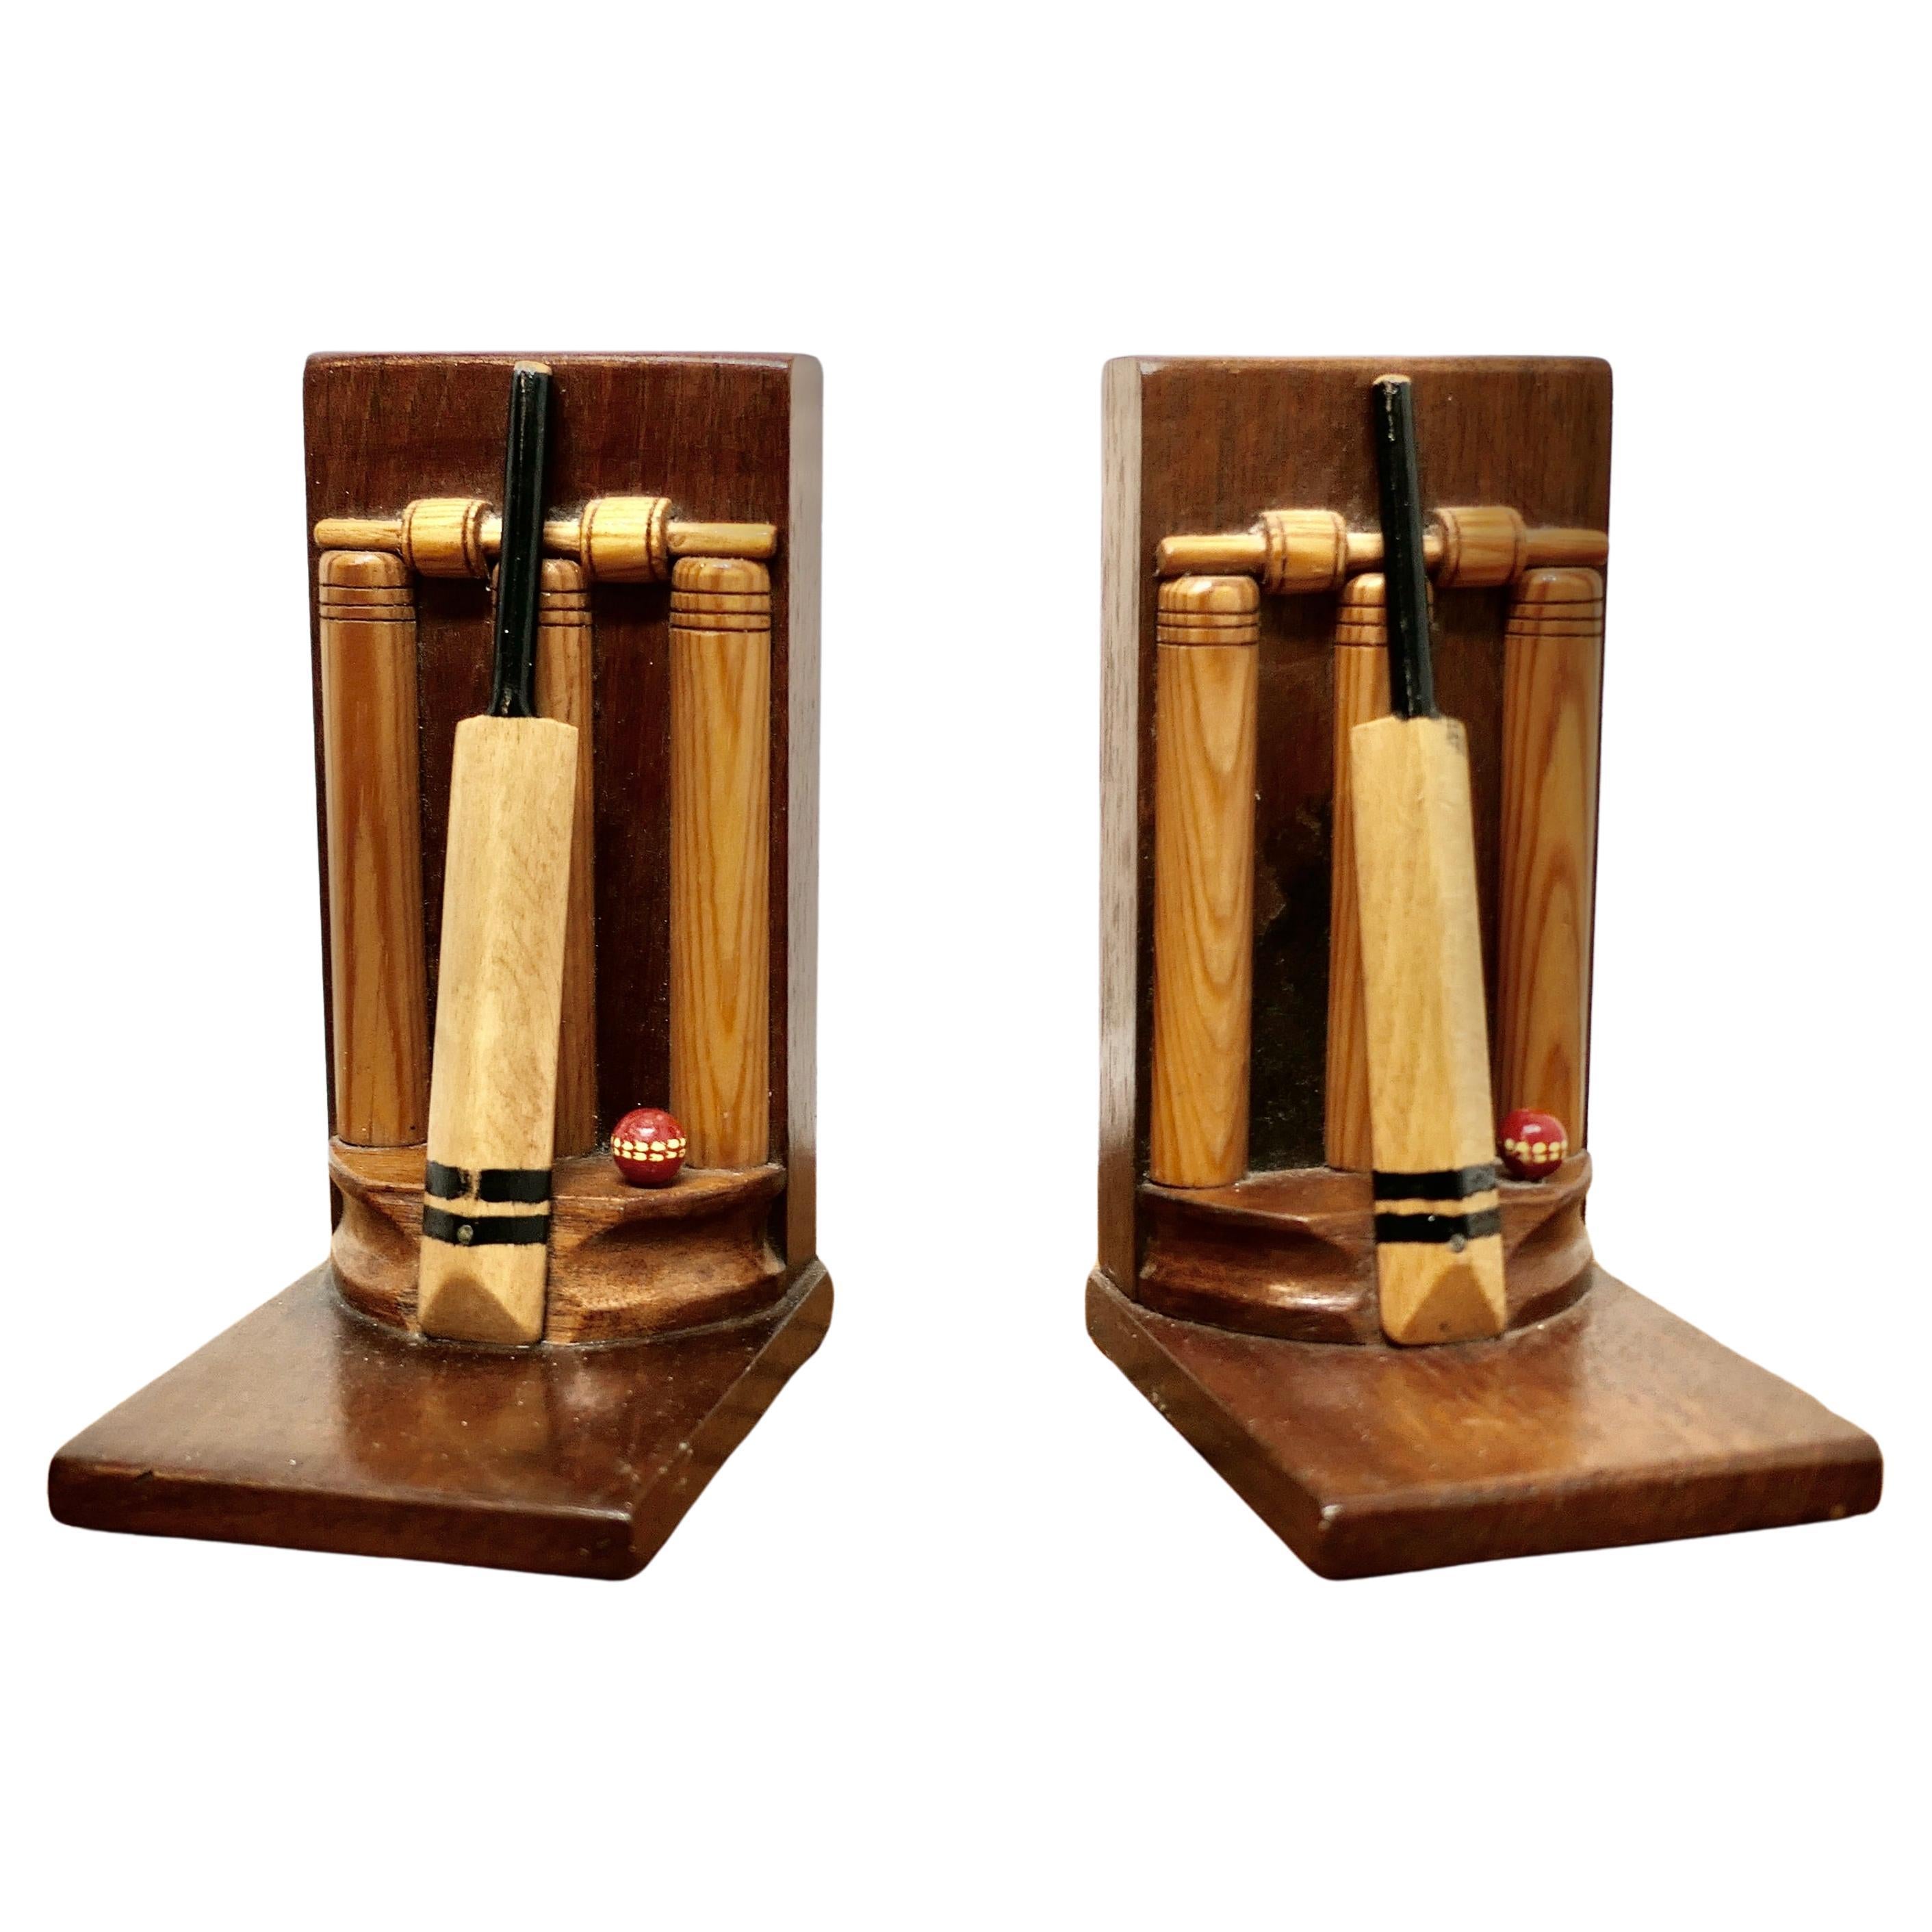 A Pair of Mid Century Quirky Bookends on a Cricket theme     For Sale